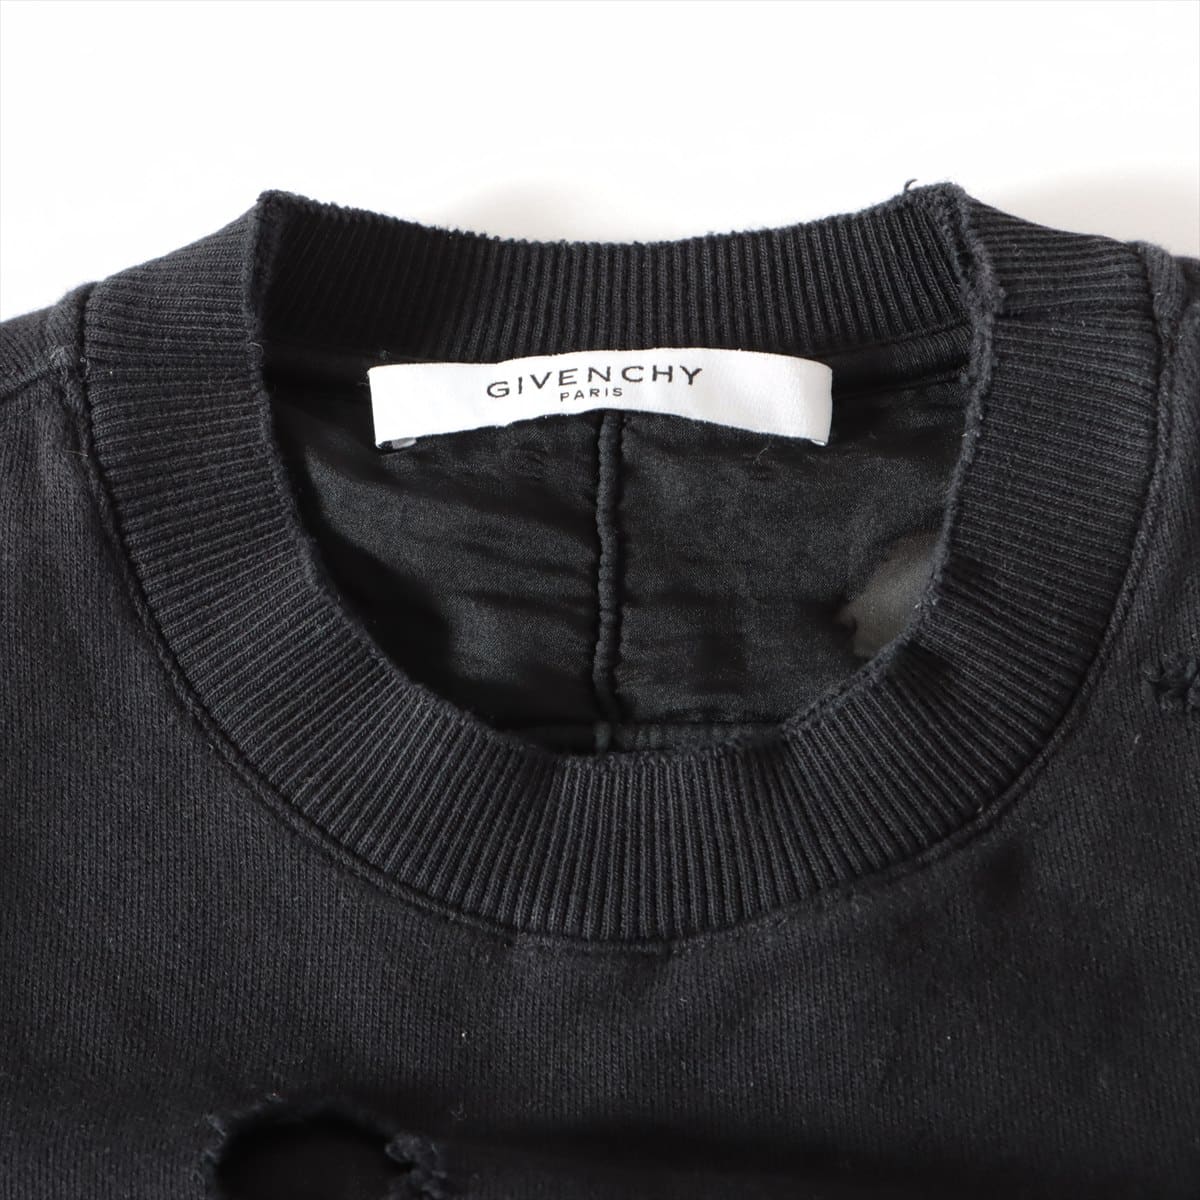 Givenchy 16SS Cotton Basic knitted fabric XS Men's Black  Destroyed crash processing